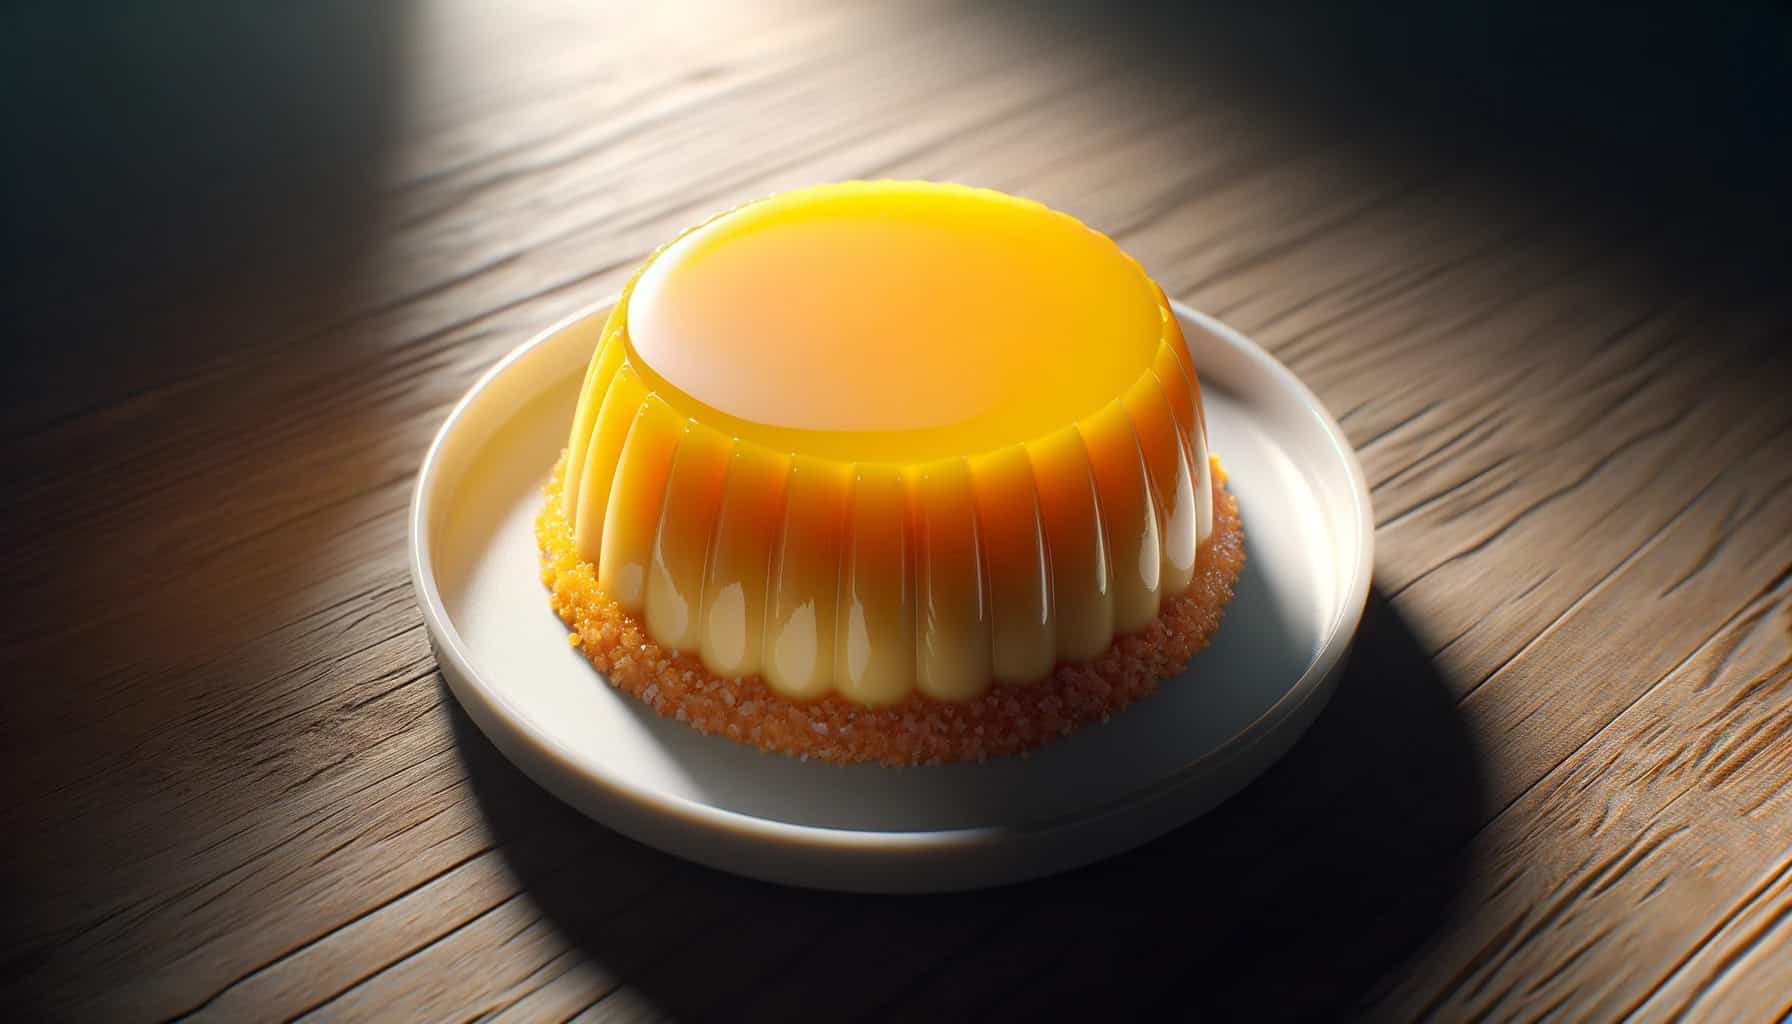 Quindim (coconut and egg yolk pudding) is presented on a white porcelain plate. The quindim is vibrant yellow, with a glossy top and a grainy coconut base.